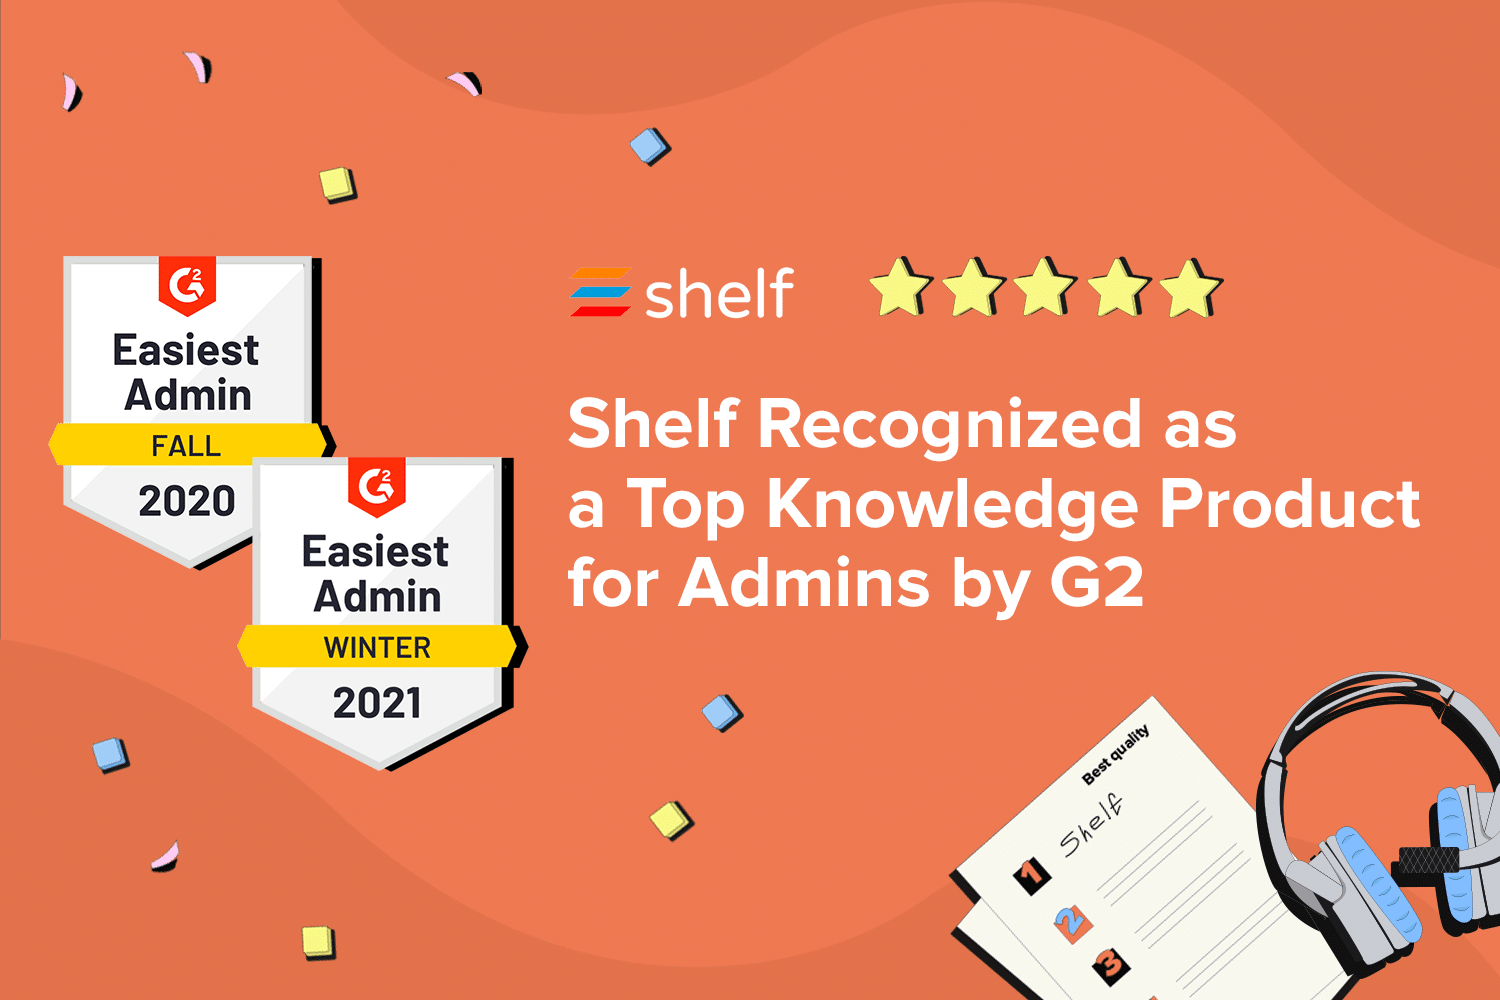 Shelf Recognized as a Top Knowledge Product for Admins by G2: image 1